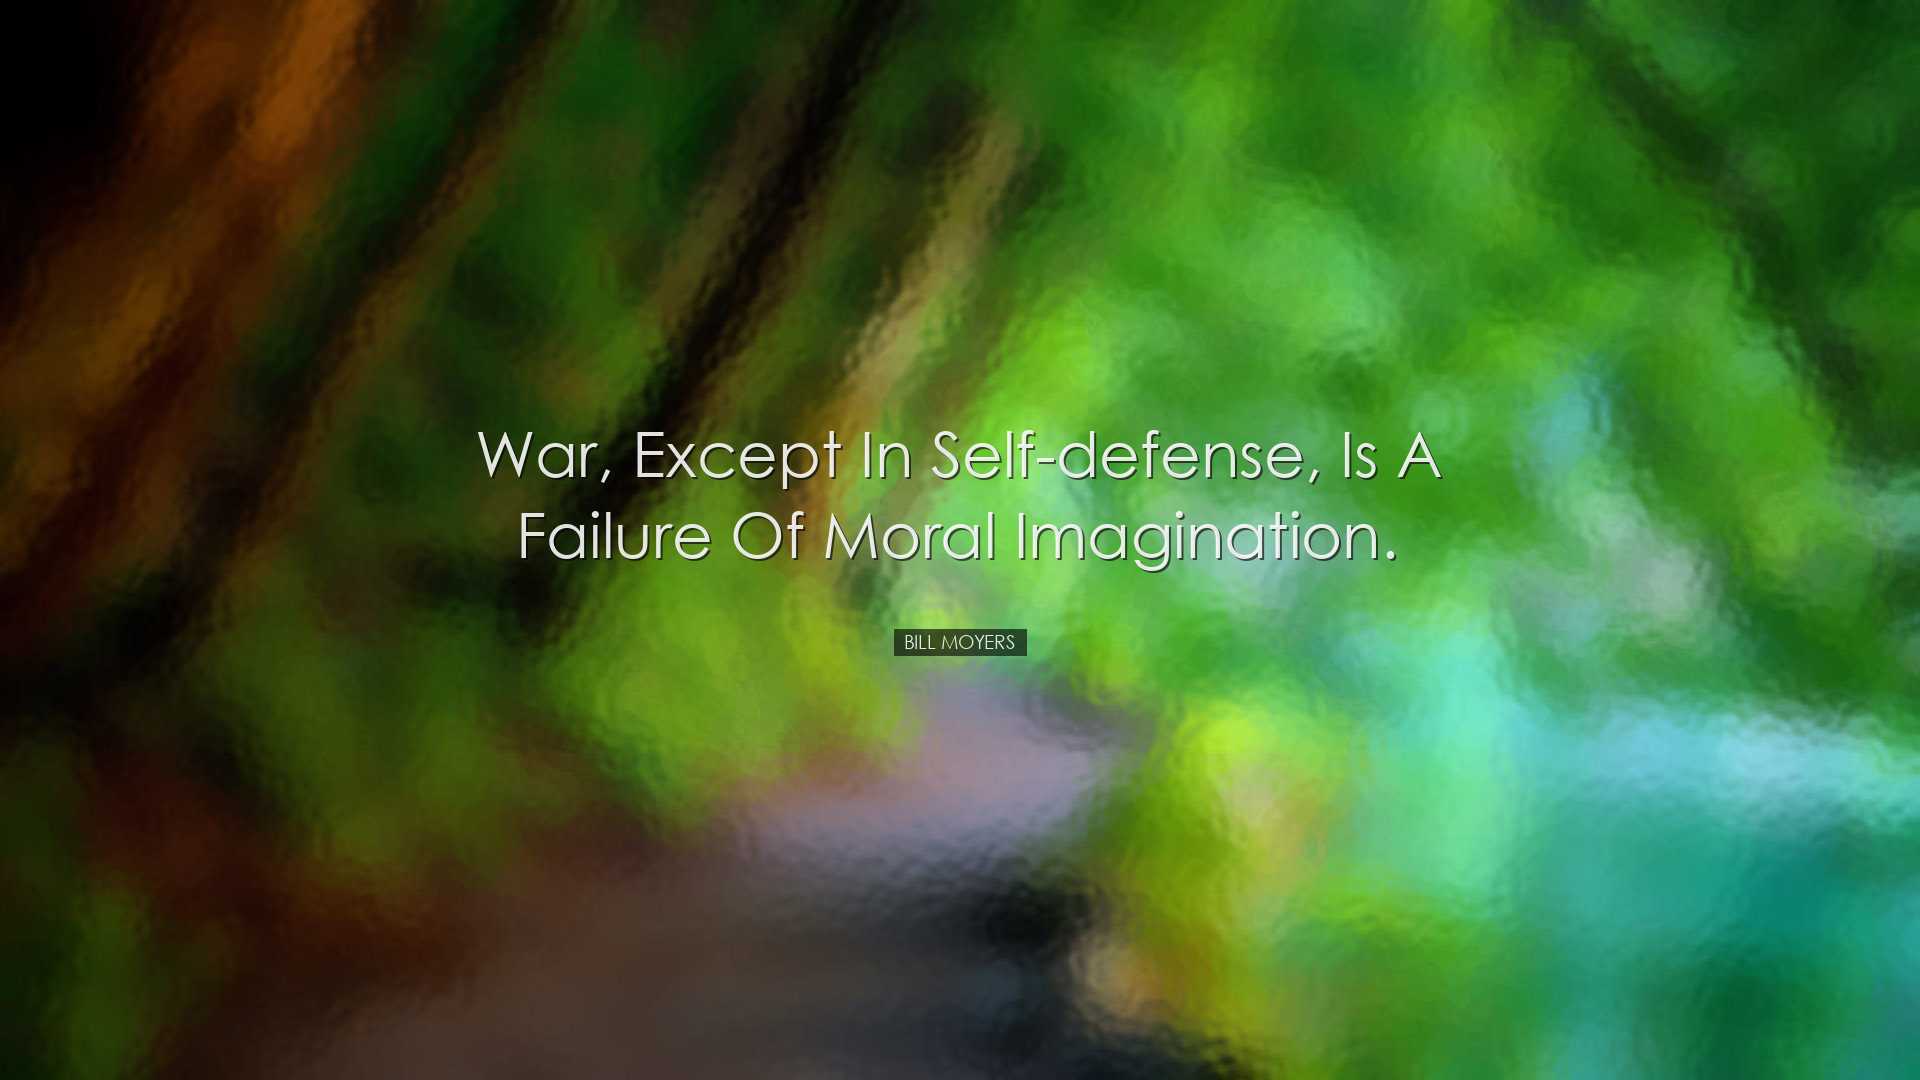 War, except in self-defense, is a failure of moral imagination. -